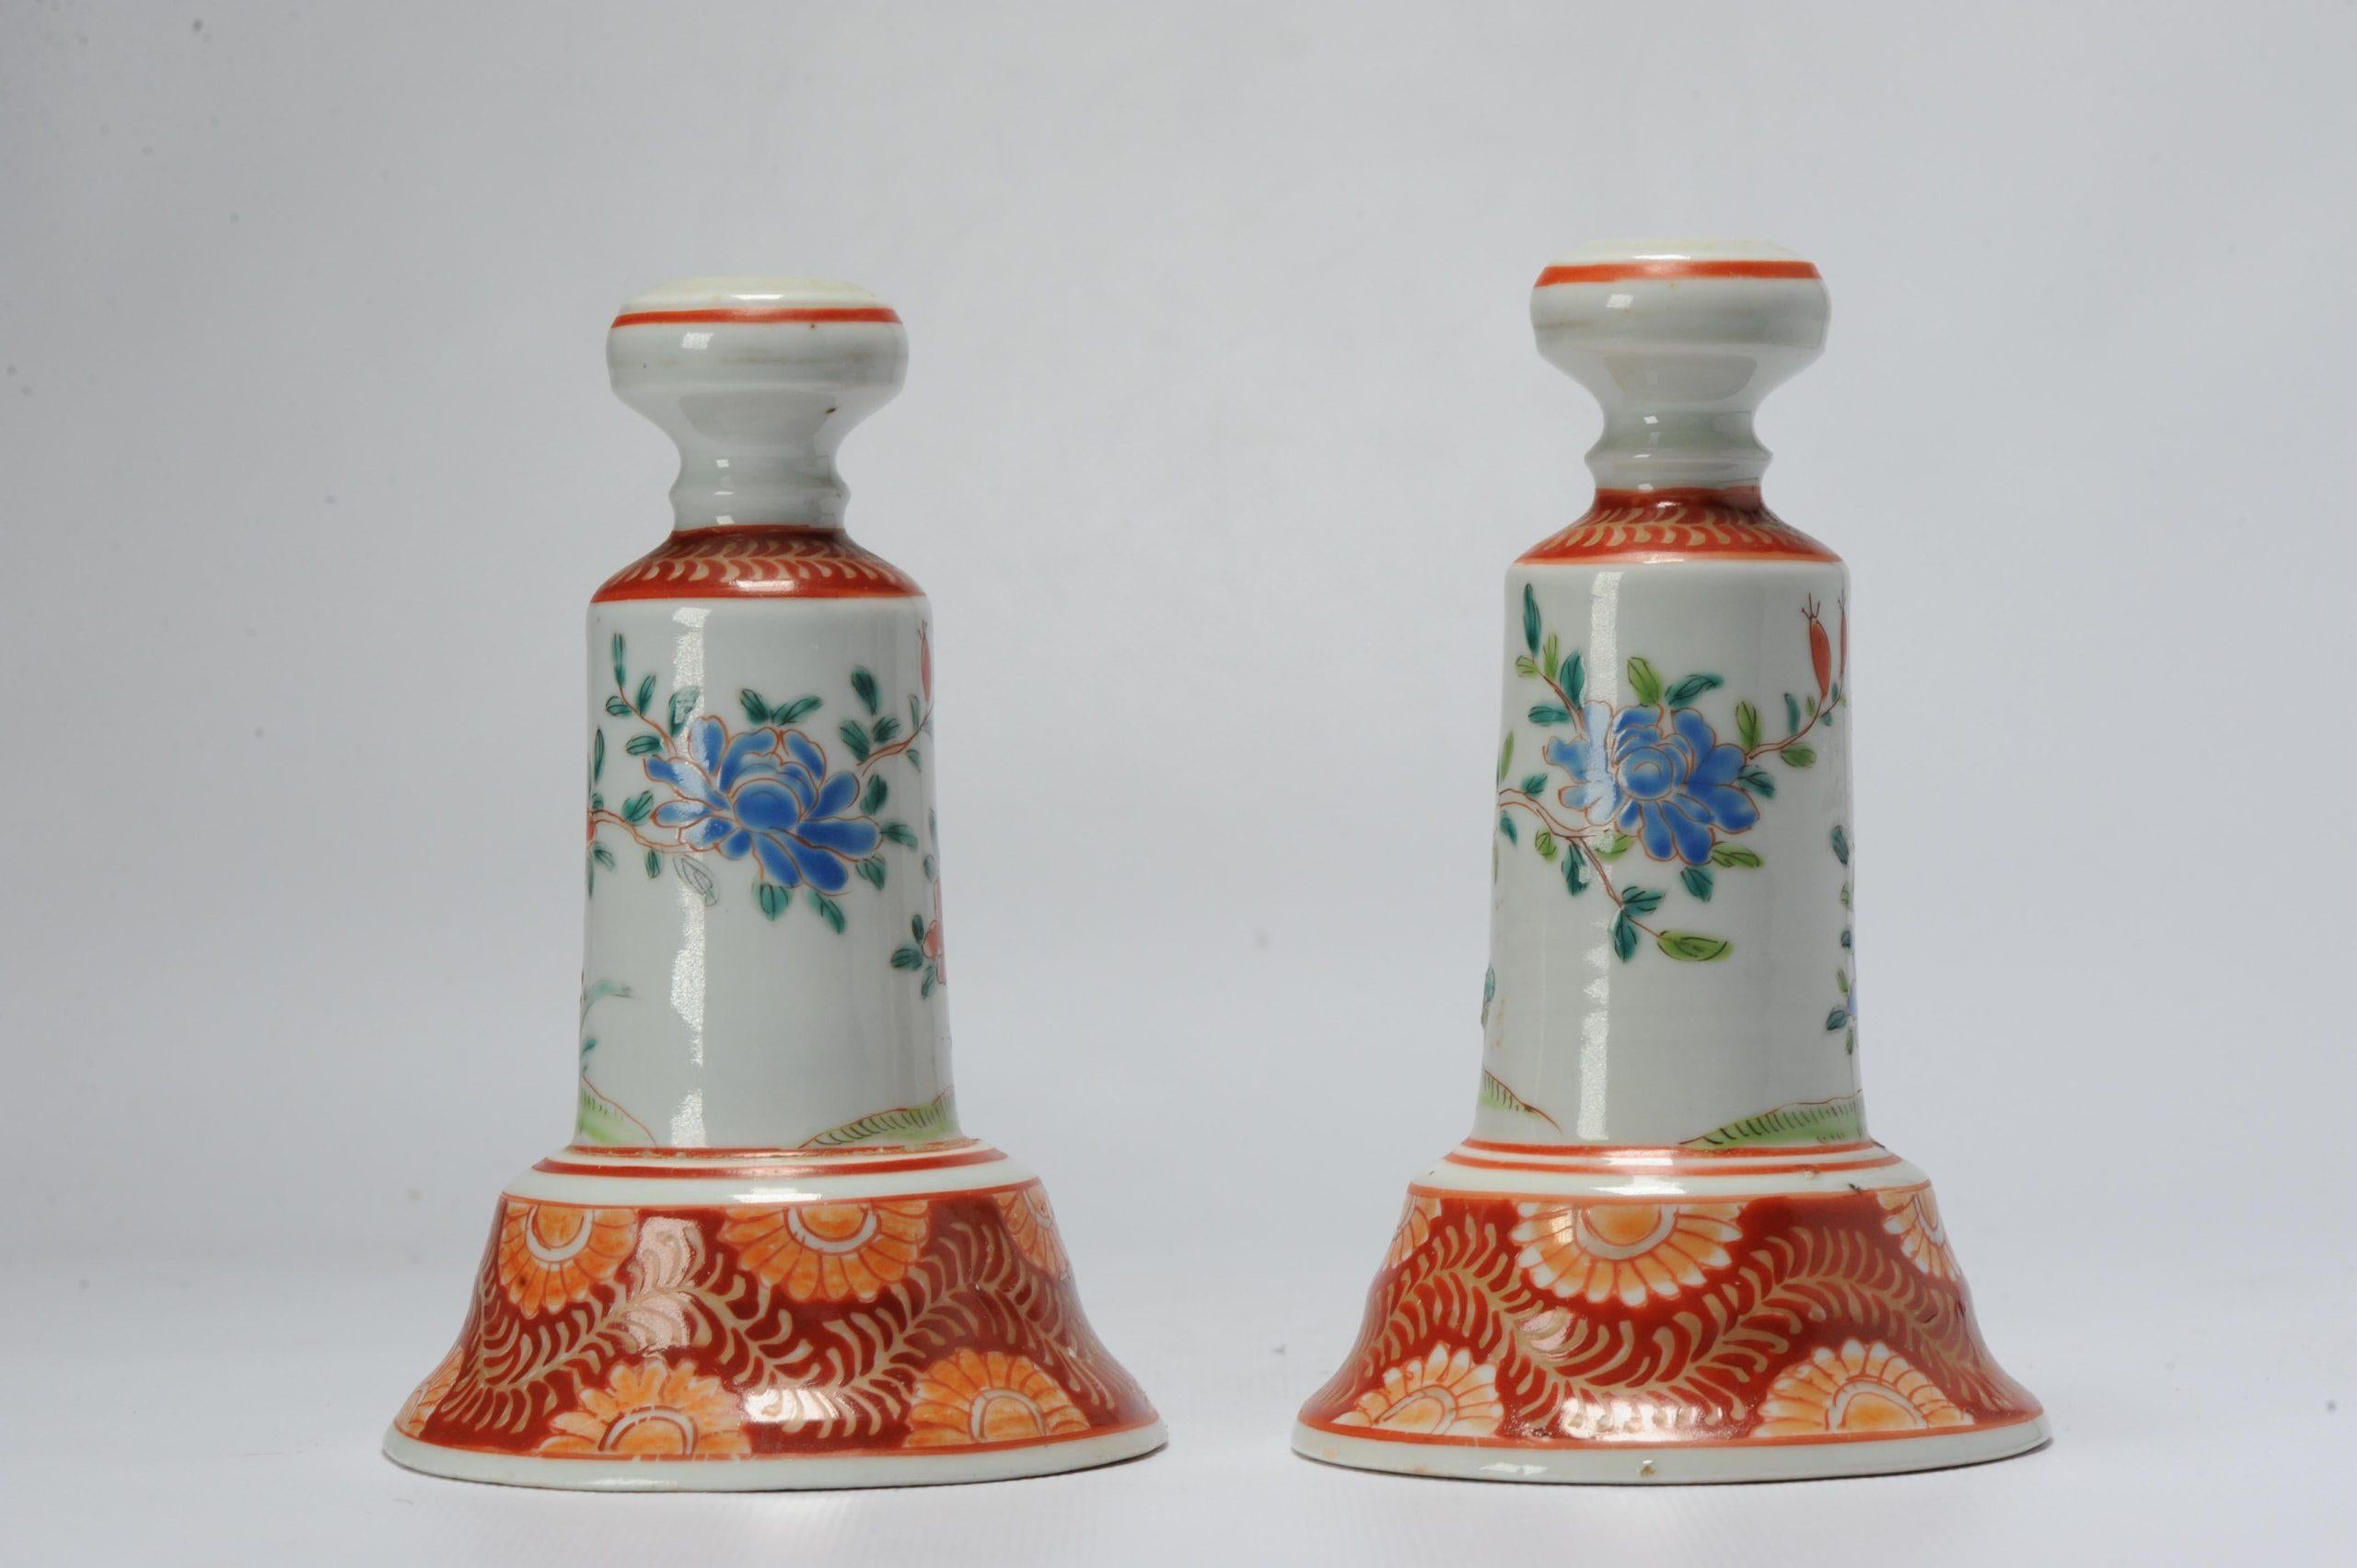 Superb quality Hichozan. Pair of two candlestick holders With typical painting enamels and scene of birds in a floral landscape. Absolute collectors item and nice to be used on the dinner table.

Additional information:
Material: Porcelain &